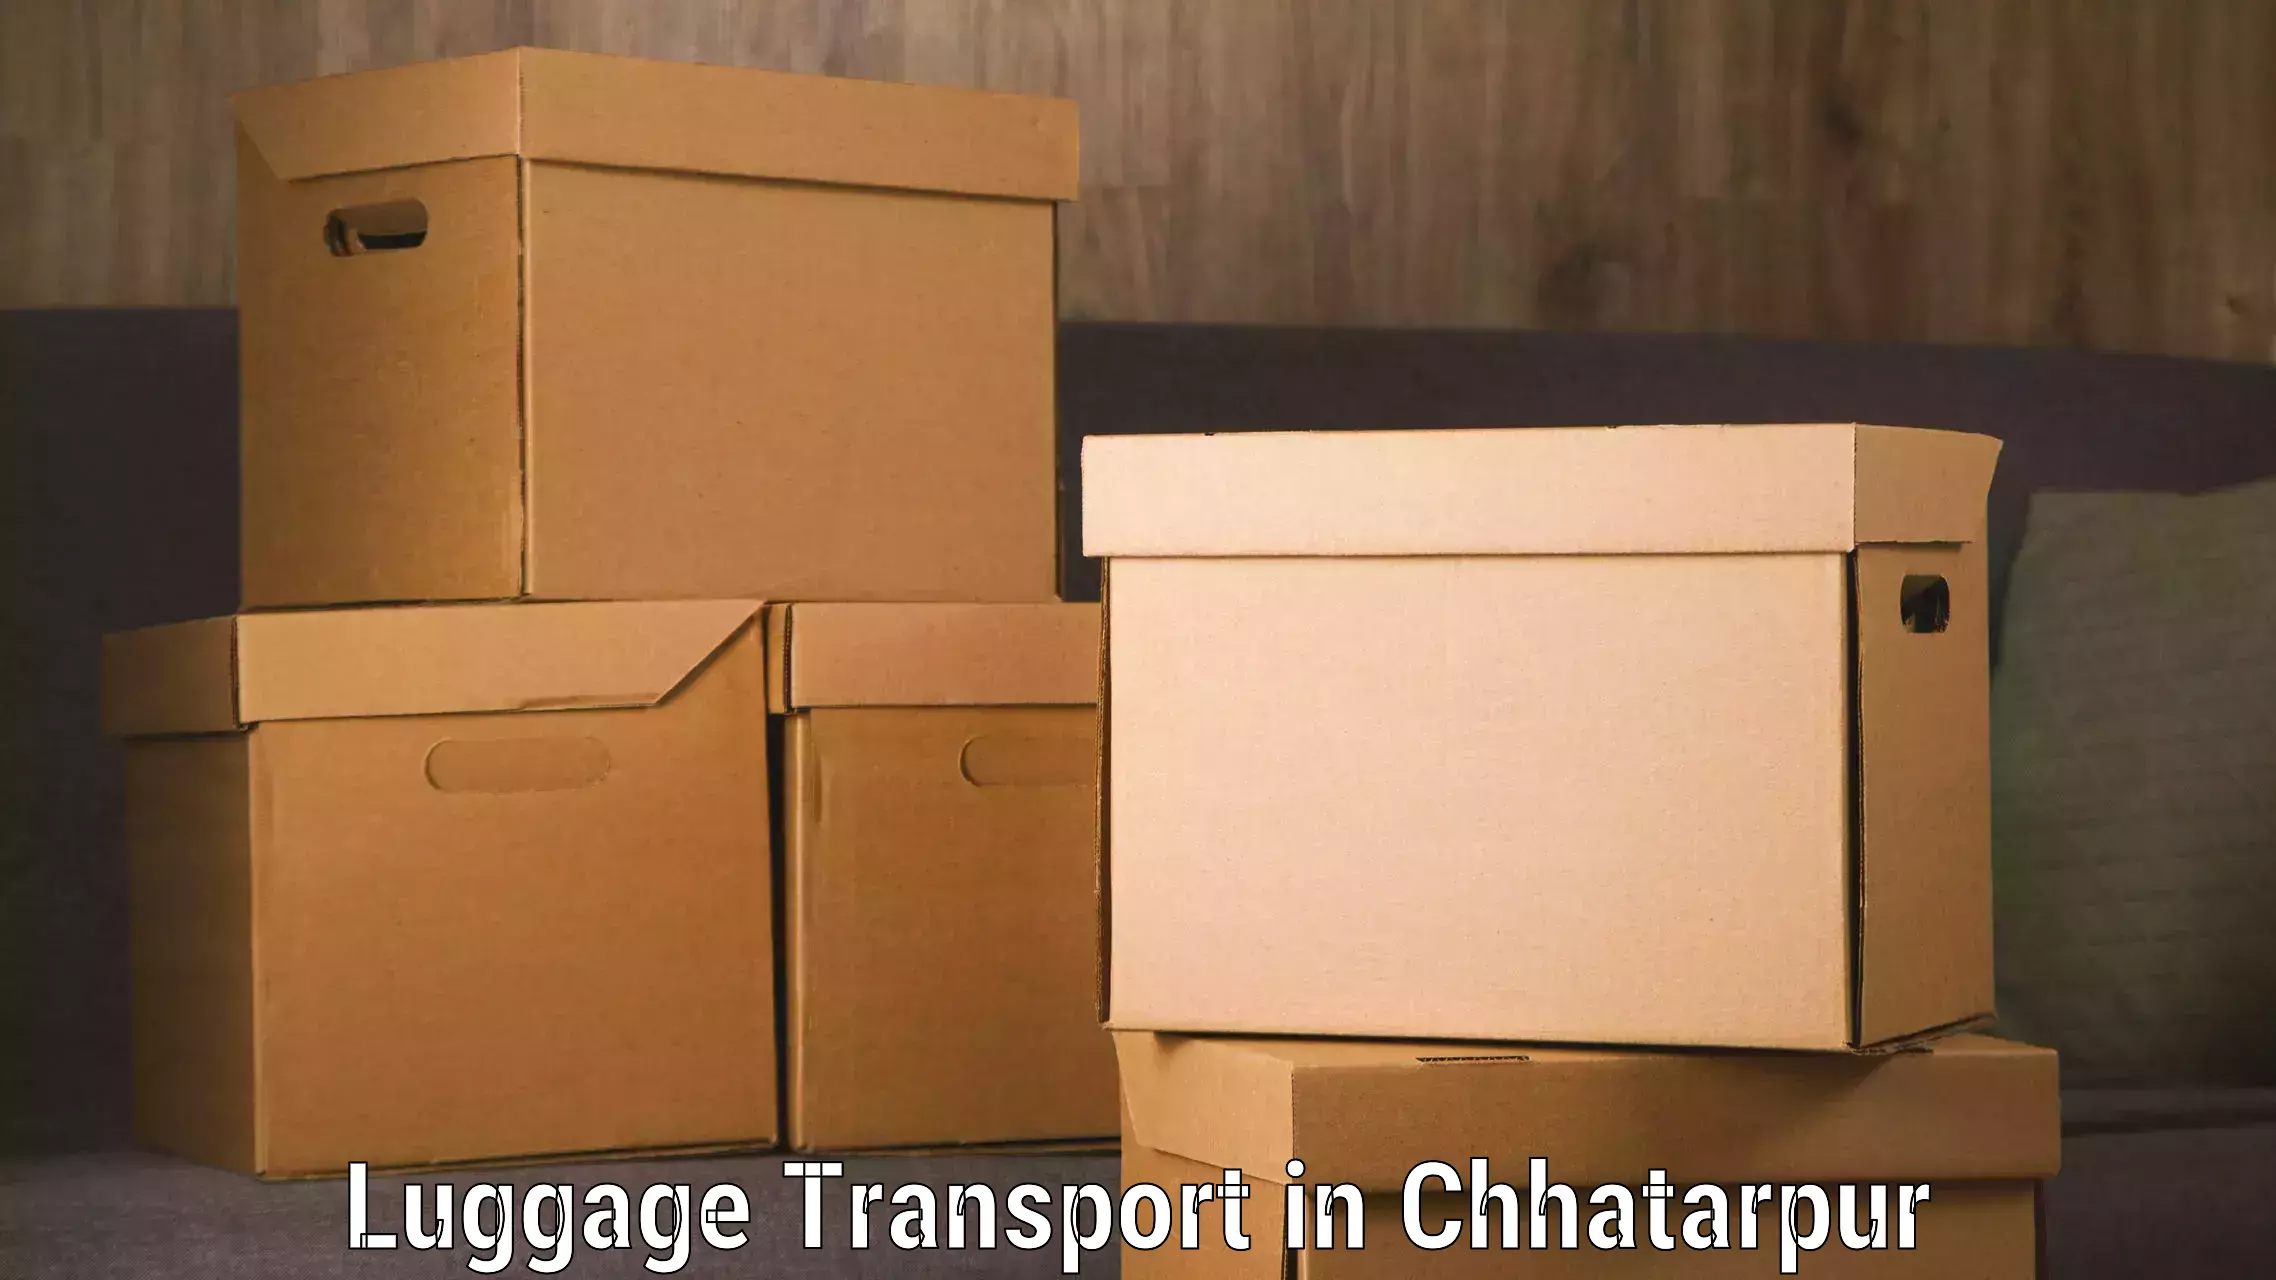 Group luggage shipping in Chhatarpur